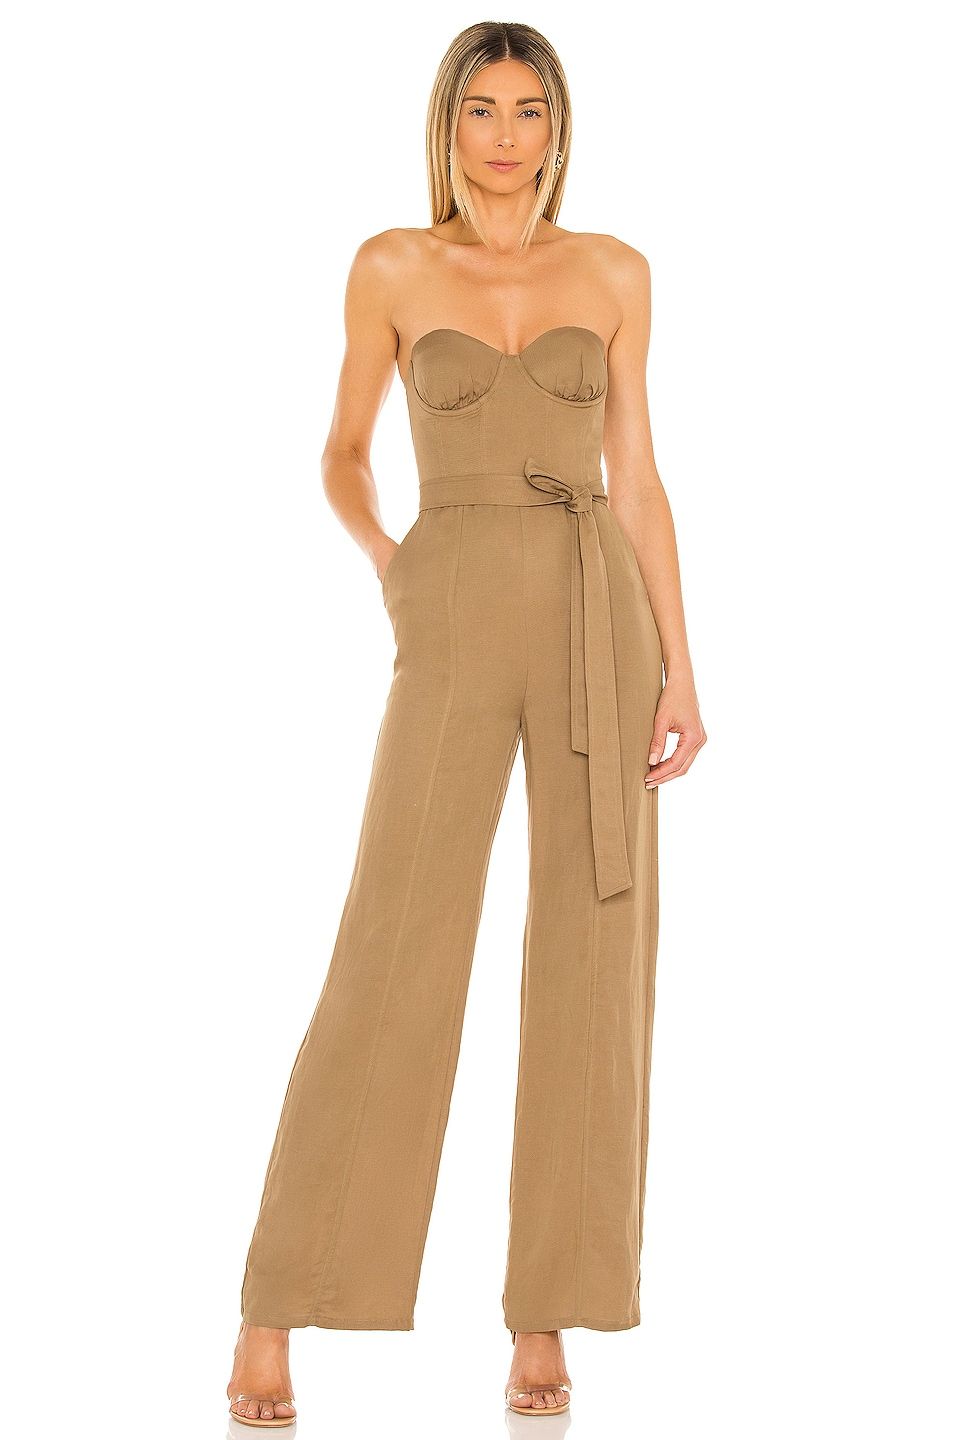 Lovers and Friends Steph Jumpsuit